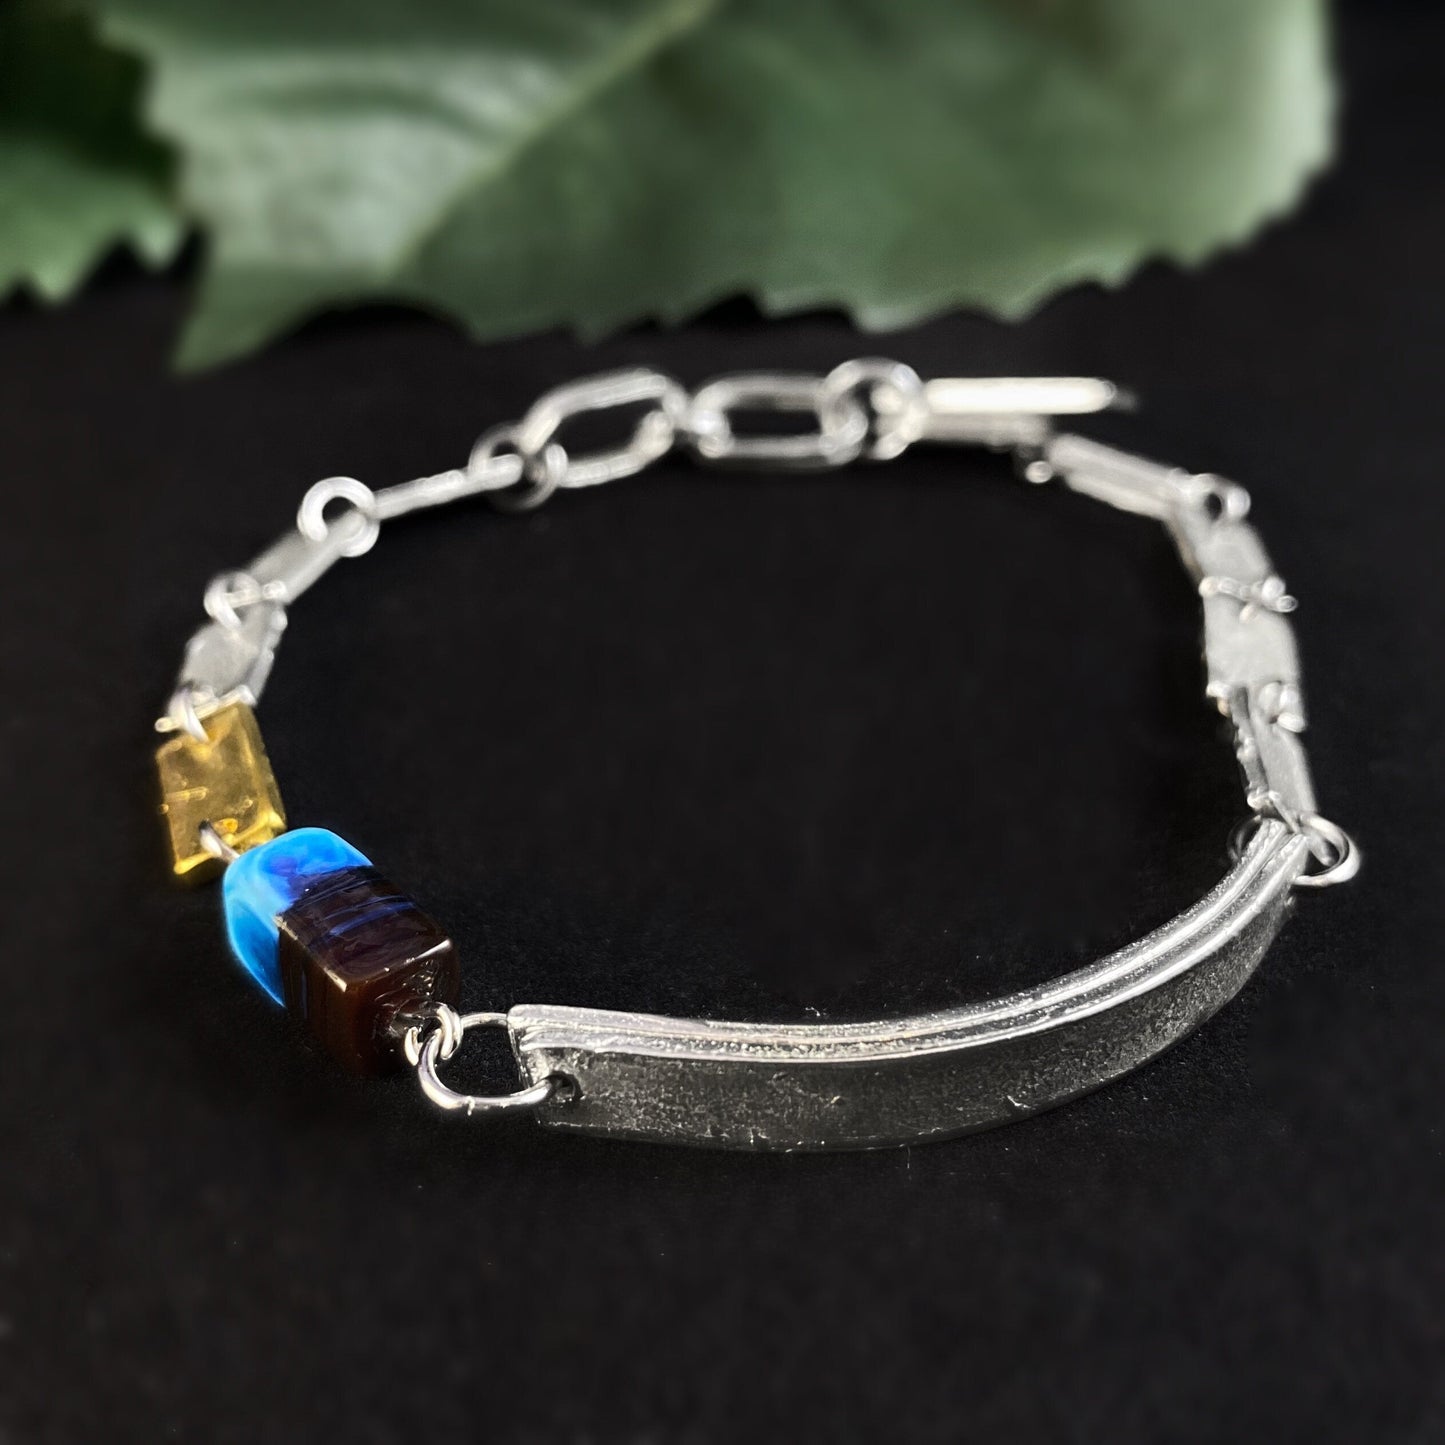 Silver, Gold and Blue Glass Beaded Bracelet - Handmade in Canada, Anne-Marie Chagnon Jewelry